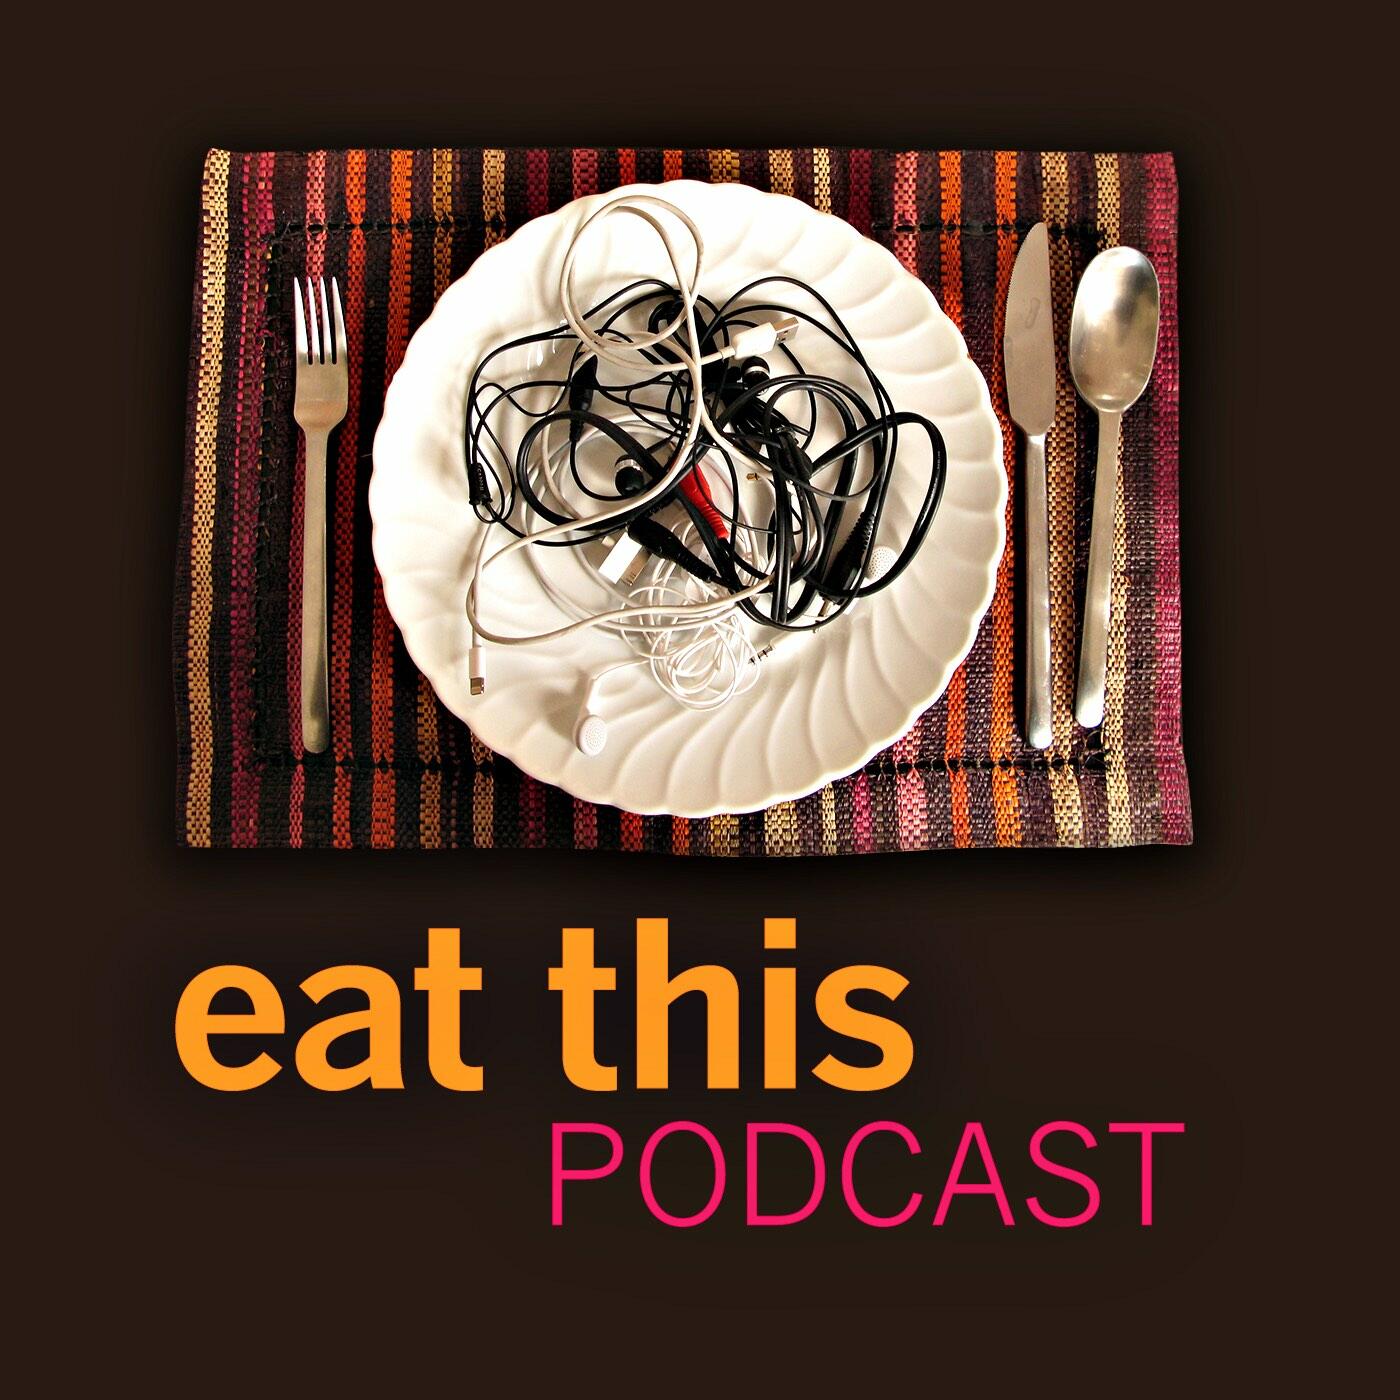 Eat this. The food we eat Podcast Ted talks. Now eat this